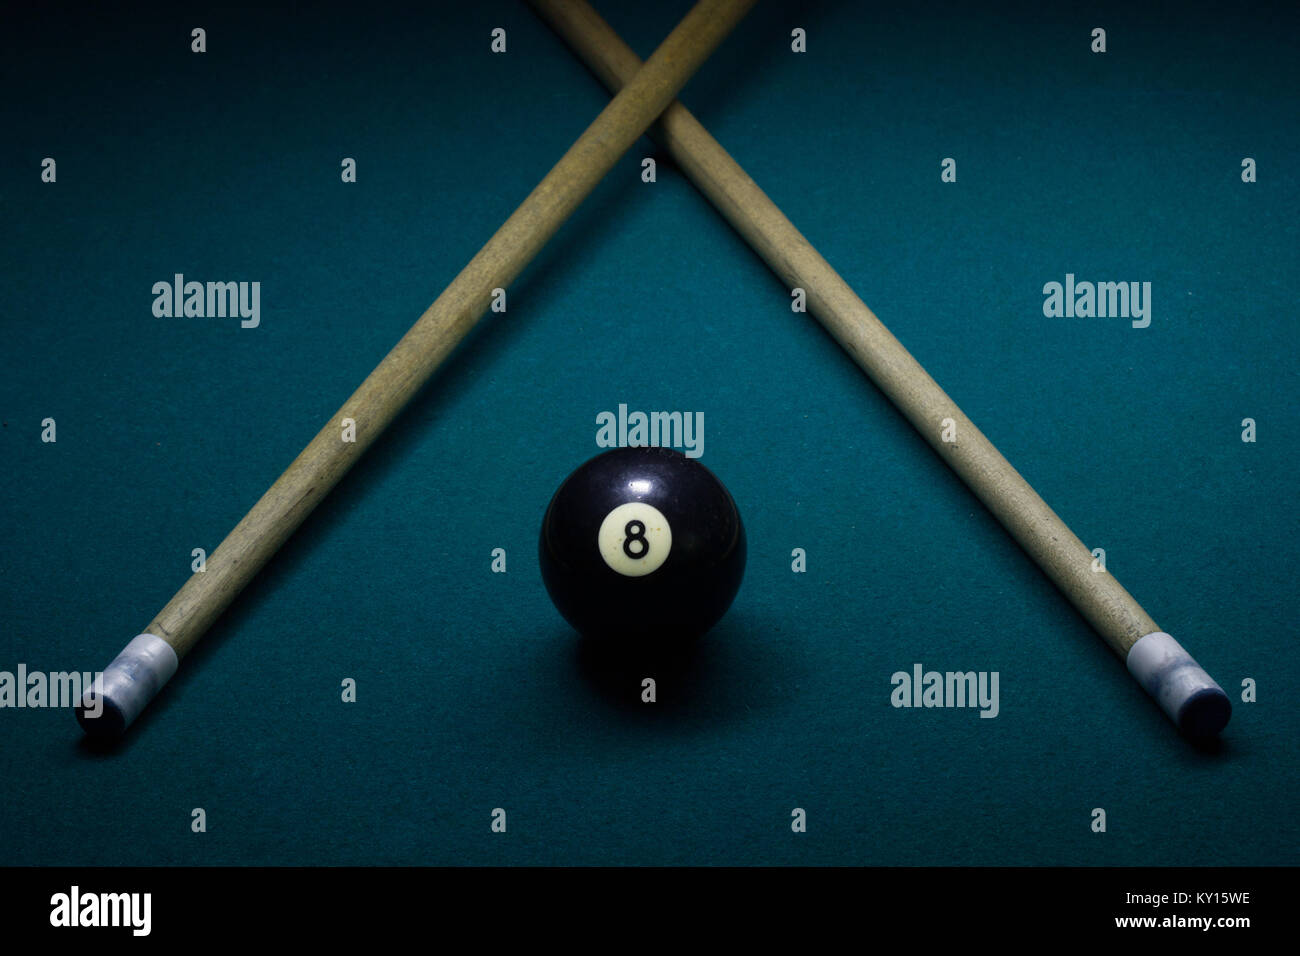 black eight ball on a green billiard table with two cue sticks in v shape Stock Photo